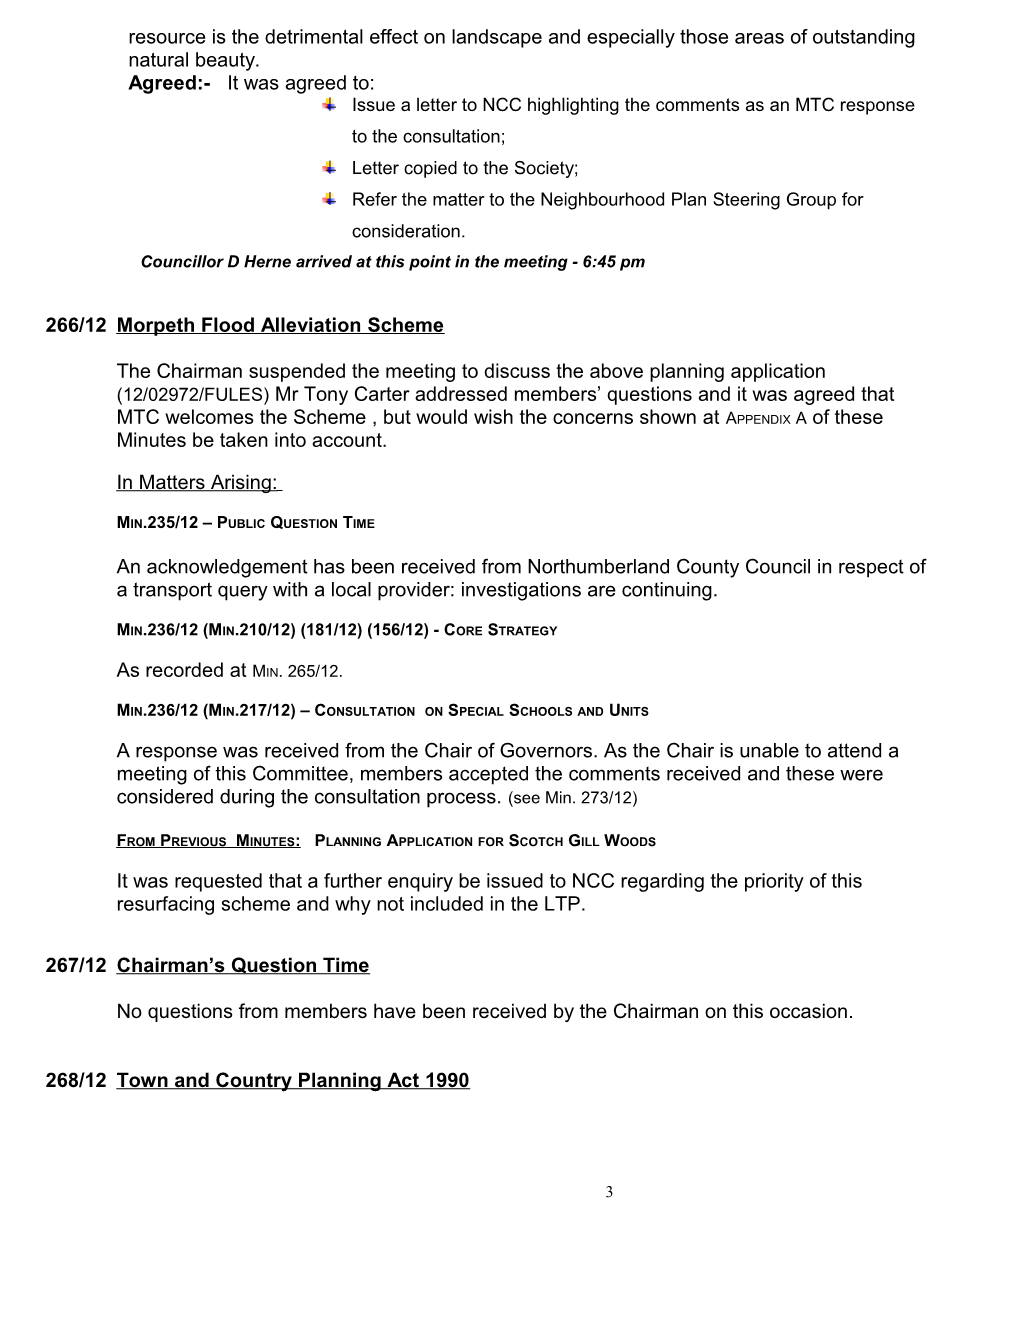 Minutes of Theplanning and Transport Committee Meeting